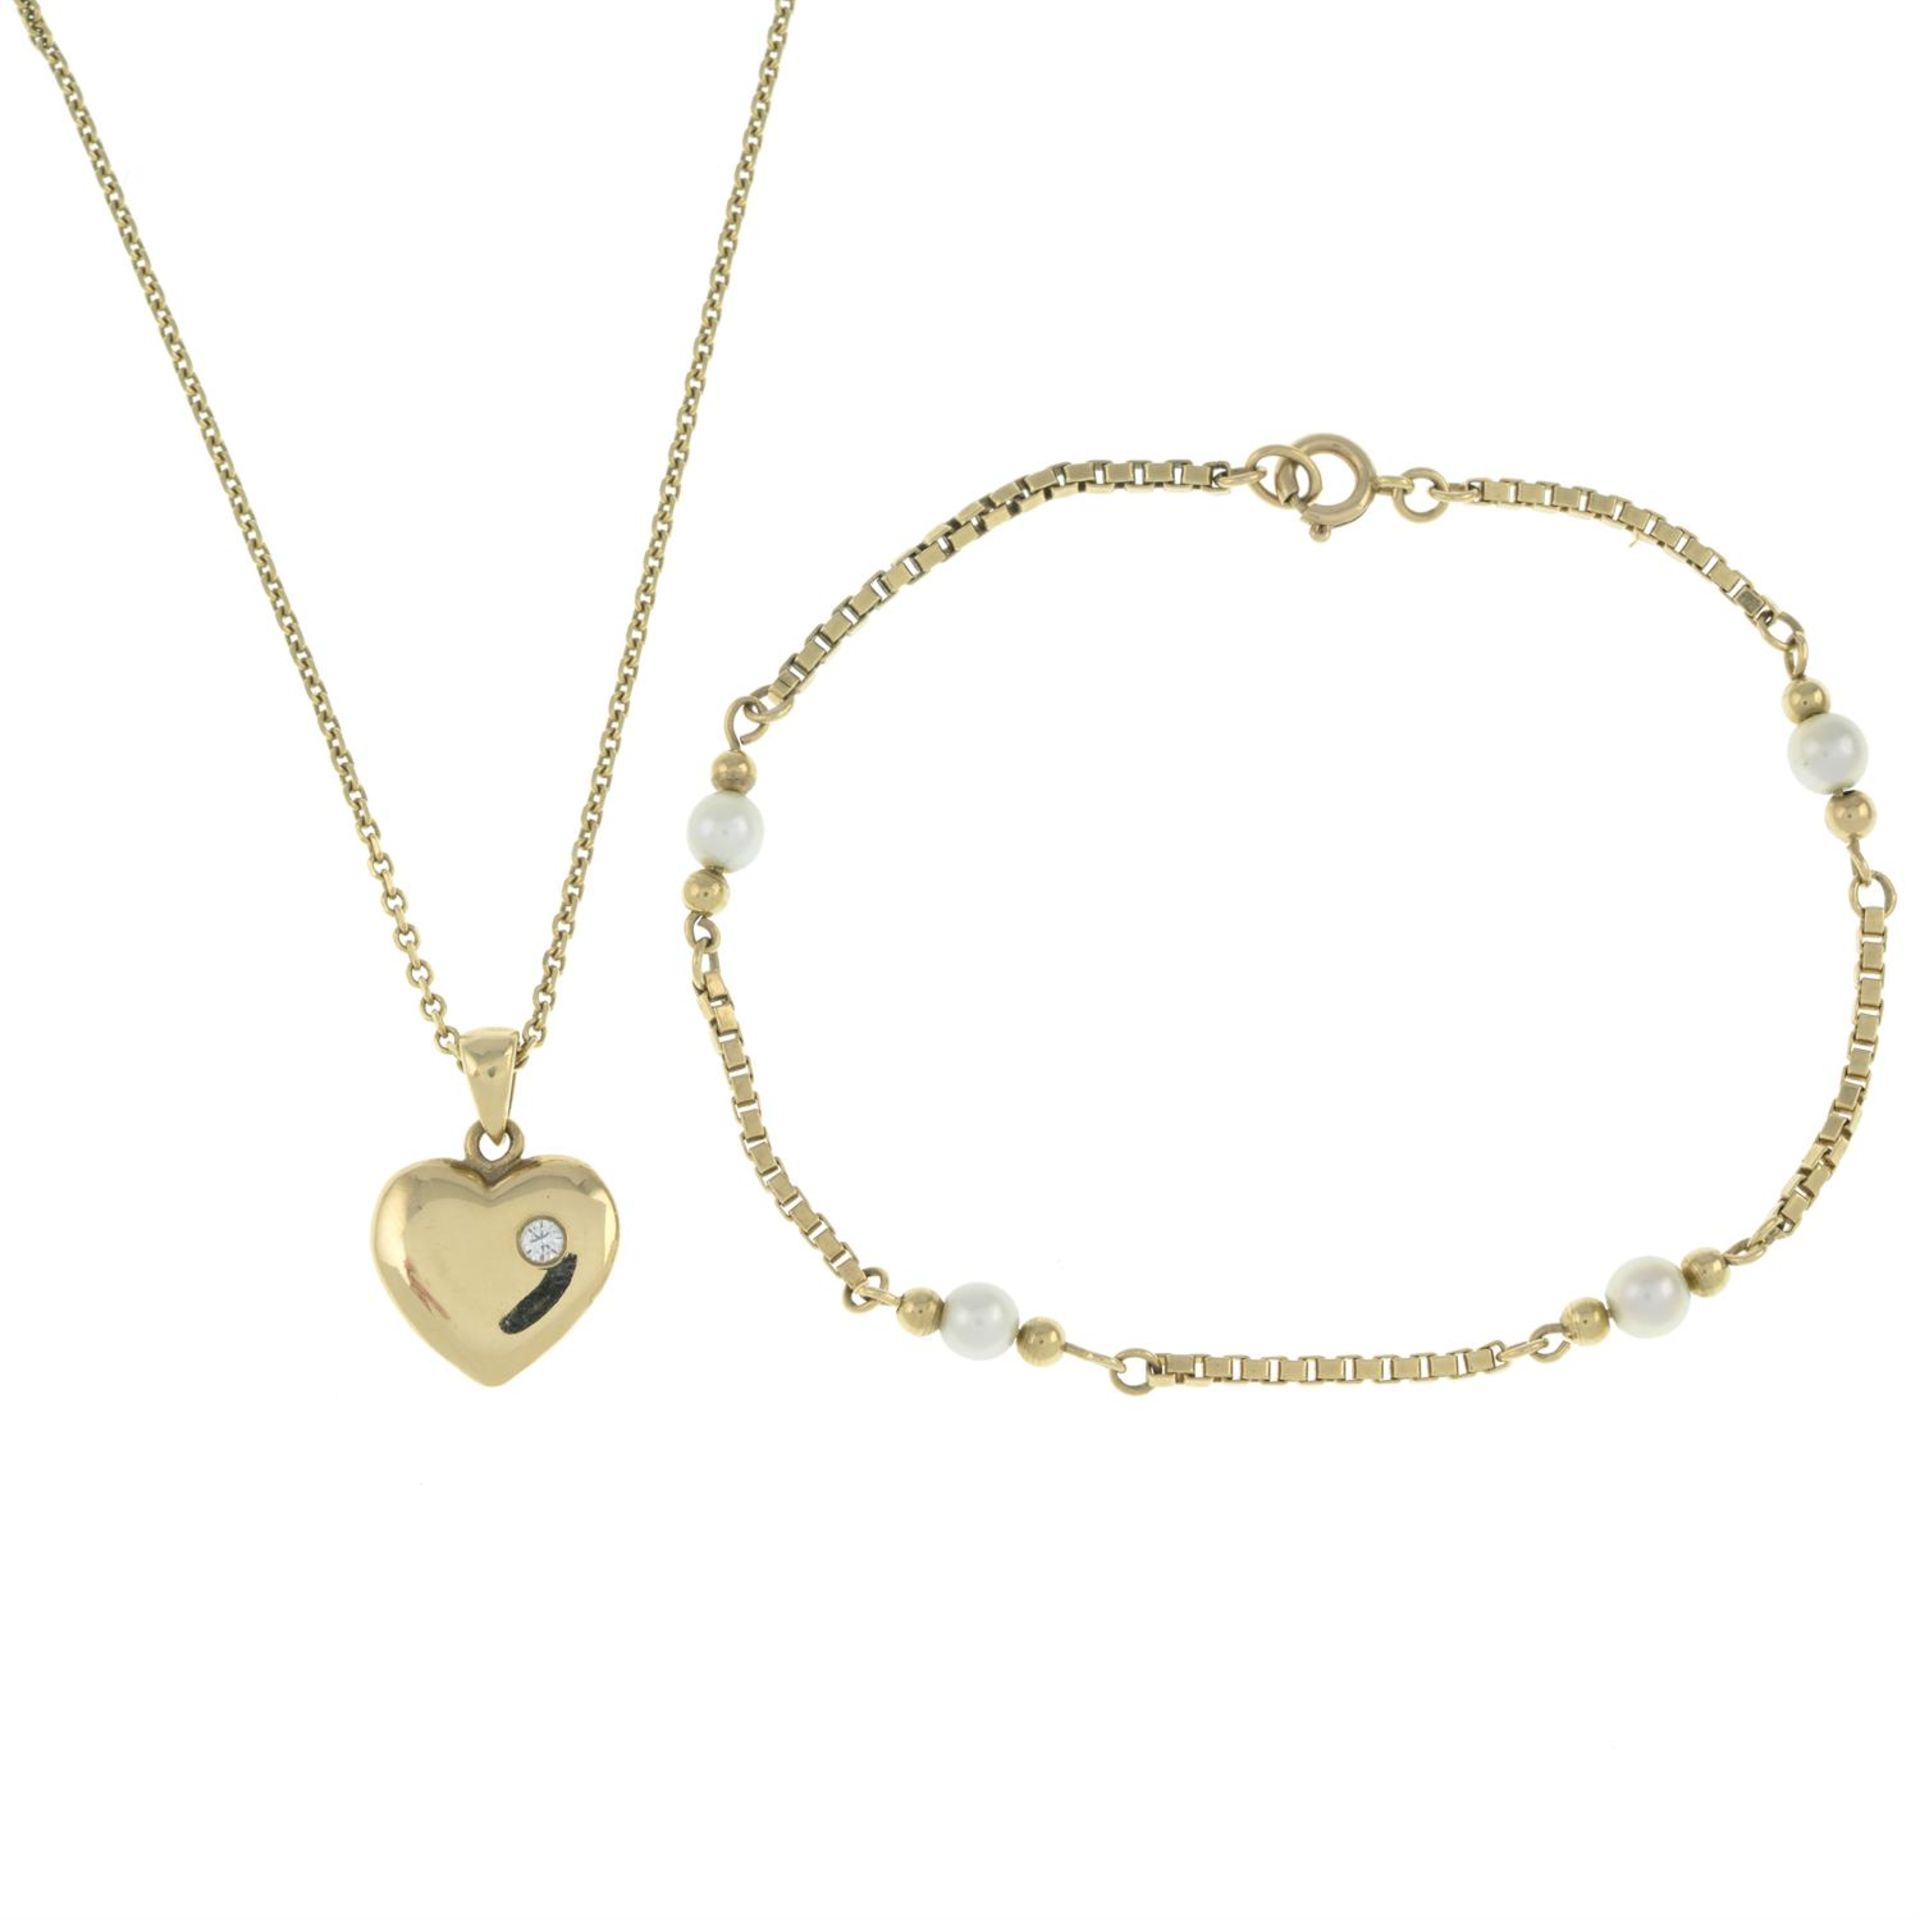 9ct gold diamond heart pendant, with 9ct gold chain & bracelet